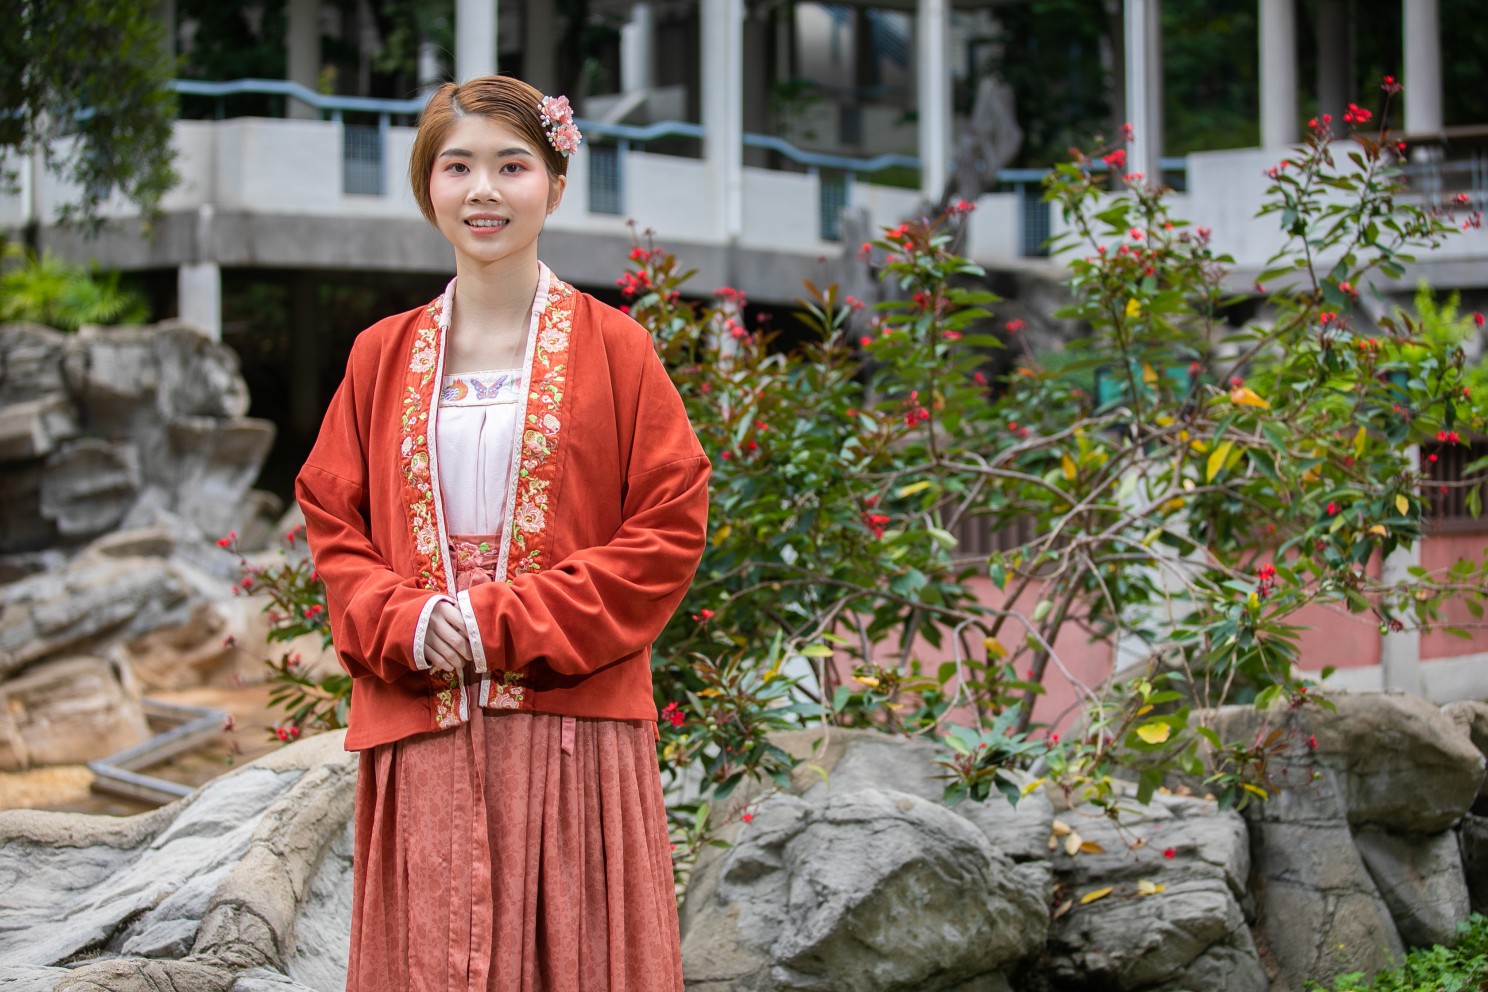 Translation student promotes traditional Chinese culture and aesthetics through hanfu